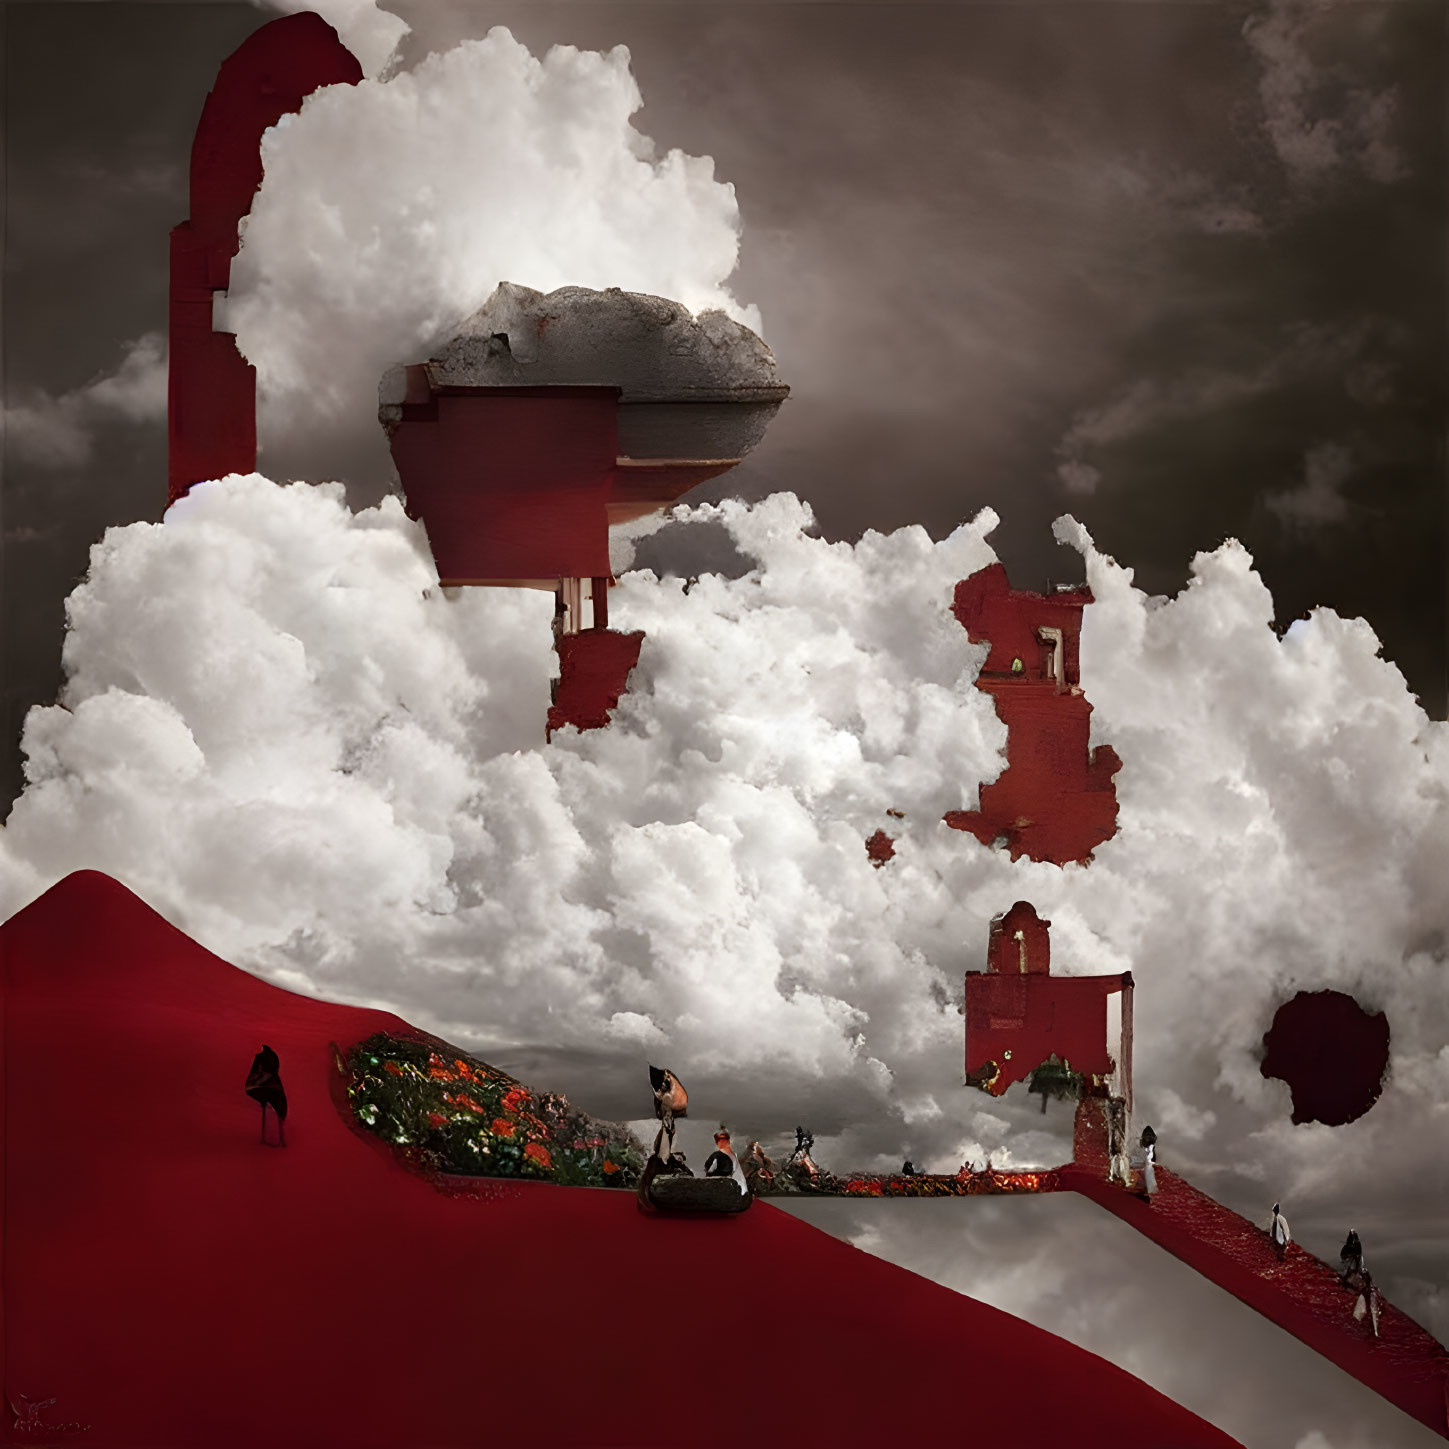 Surreal red hills and floating clouds with ruins, people in peaceful interactions